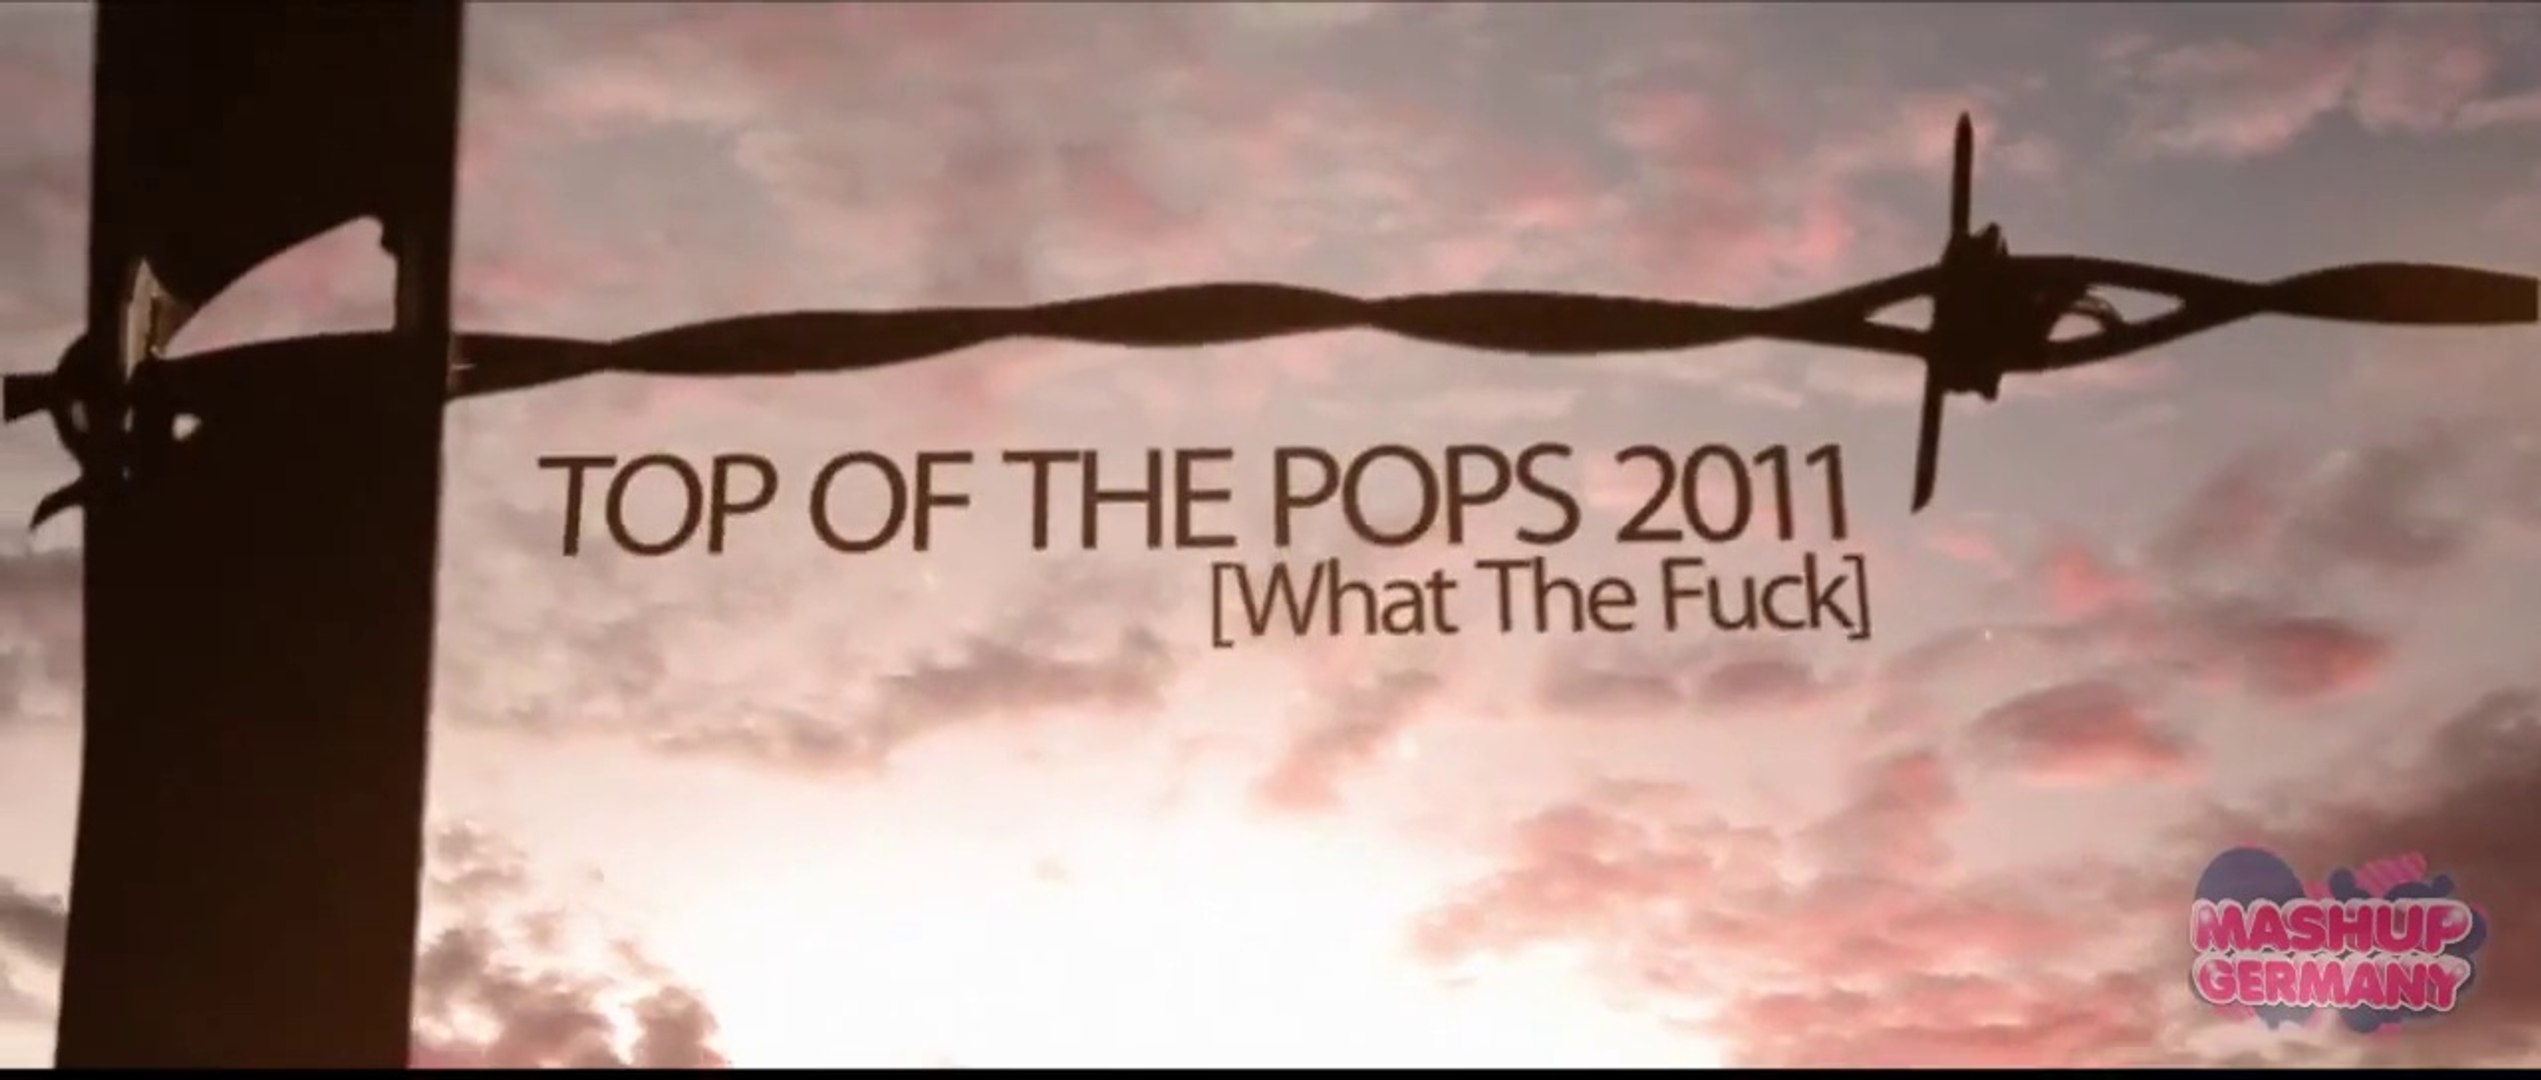 Mashup Germany Top Of The Pops 2011 What The Fuck 5D Version - video  Dailymotion